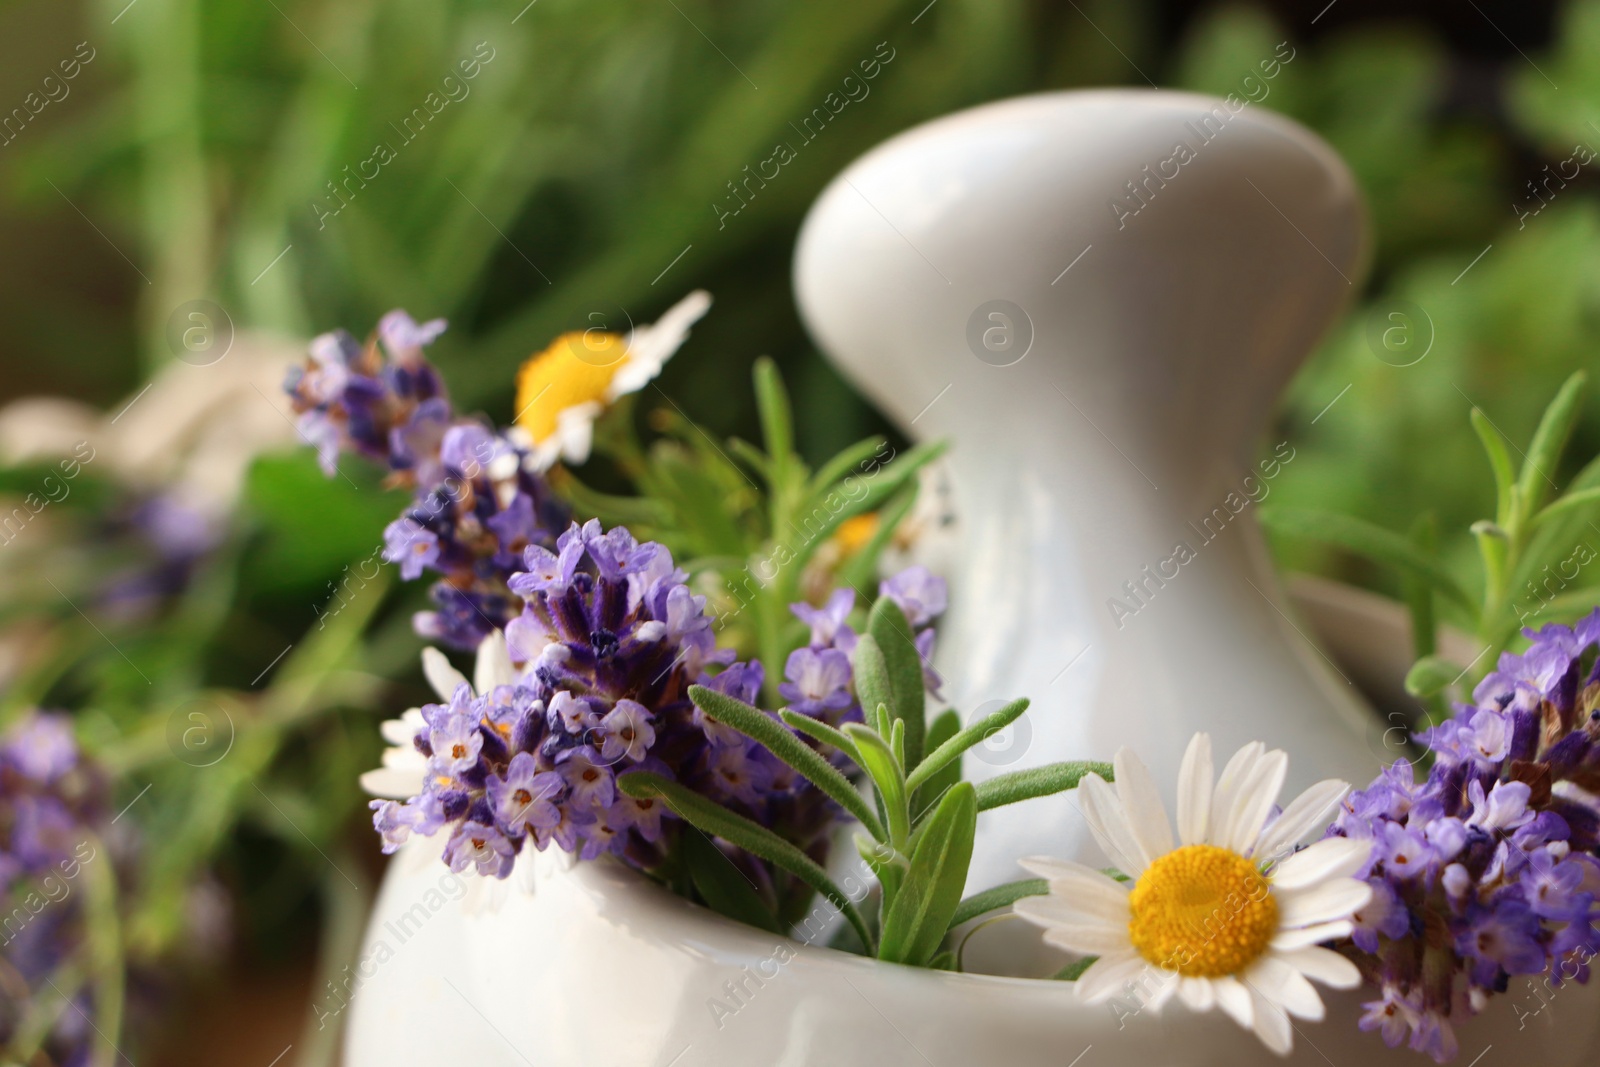 Photo of Mortar with fresh lavender, chamomile flowers, rosemary and pestle on blurred background, closeup